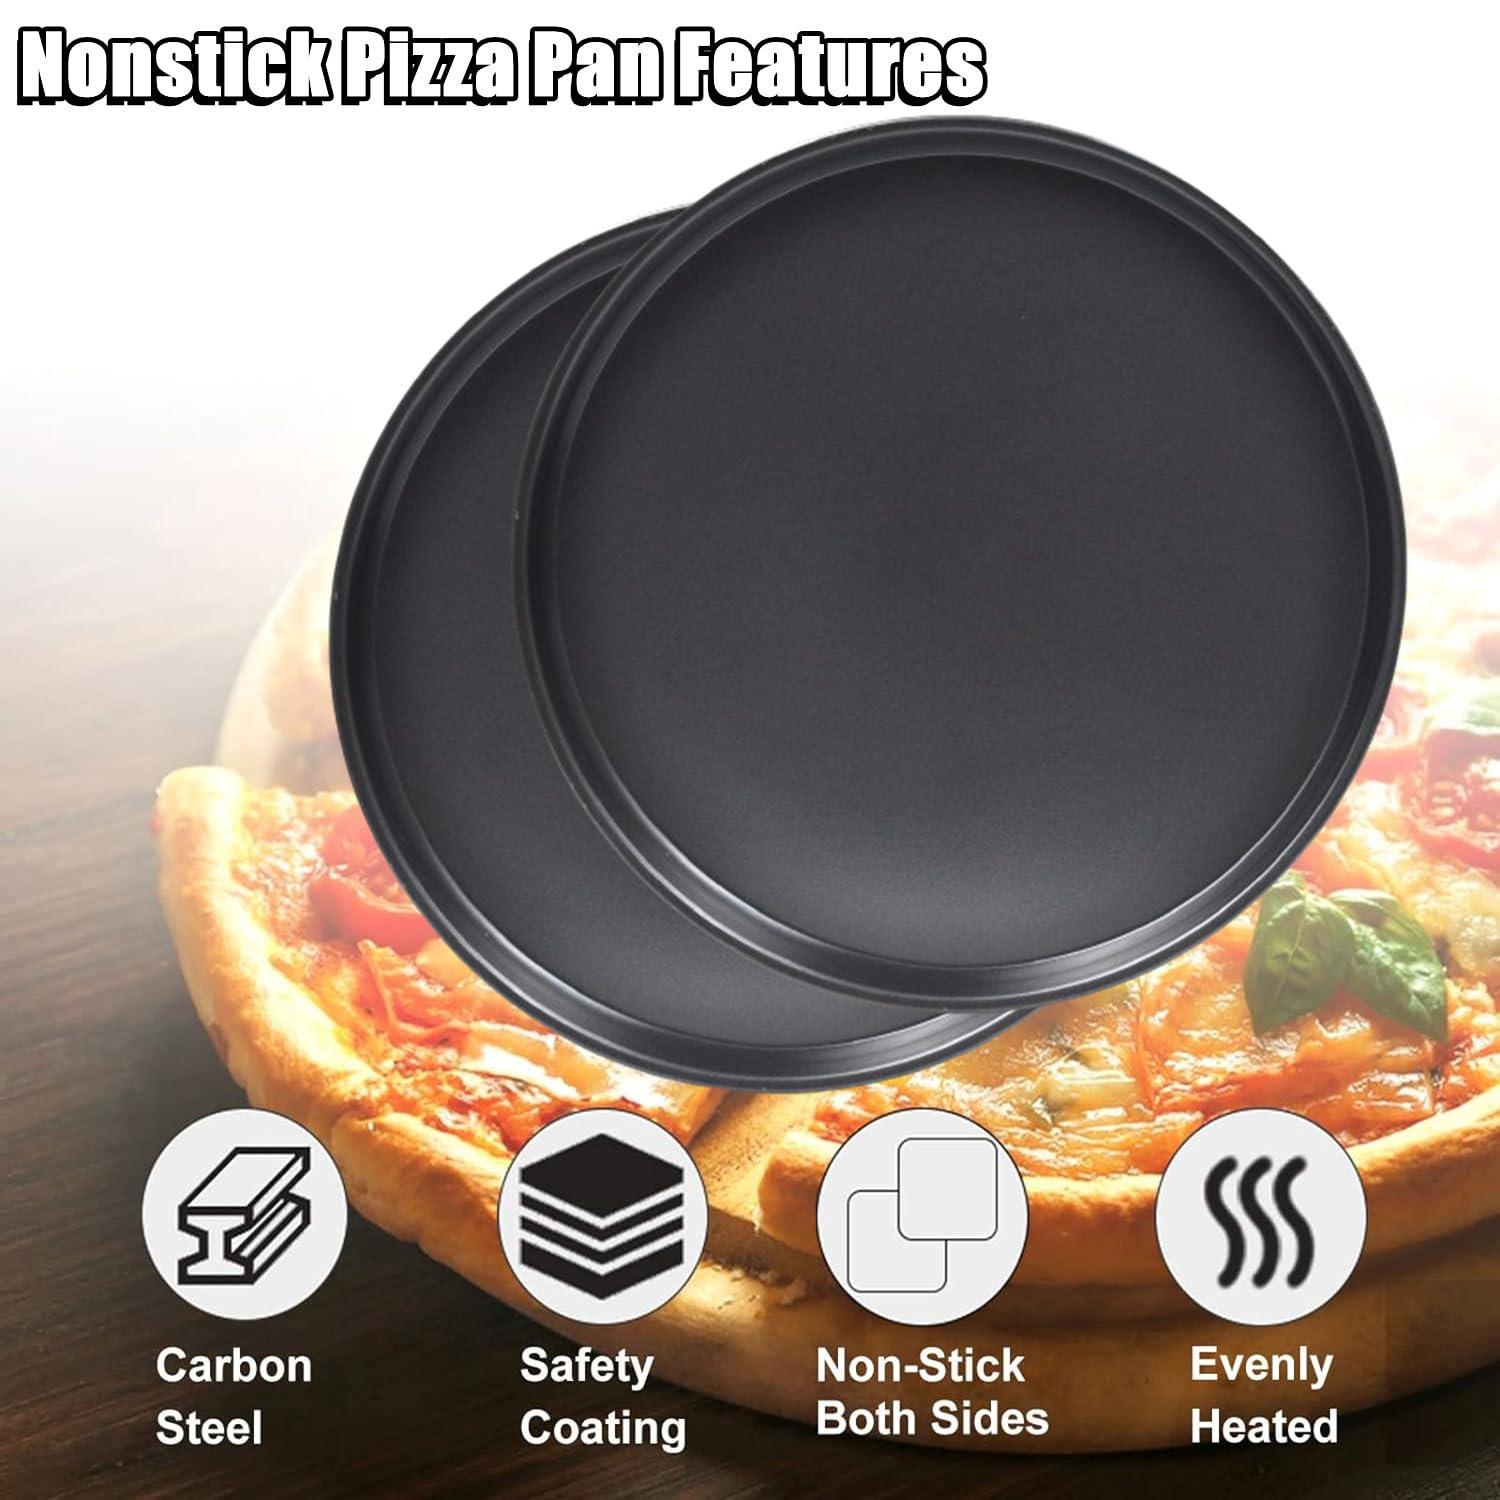 RHBLME 6 Pack Round Pizza Pan, 12.6 Inch Black Pizza Pan for Oven Non Stick Pizza Pan, Reusable Pizza Oven Tray Bakeware Pizza Tray for Restaurant Kitchen, Easy to Clean & Dishwasher Safe - CookCave